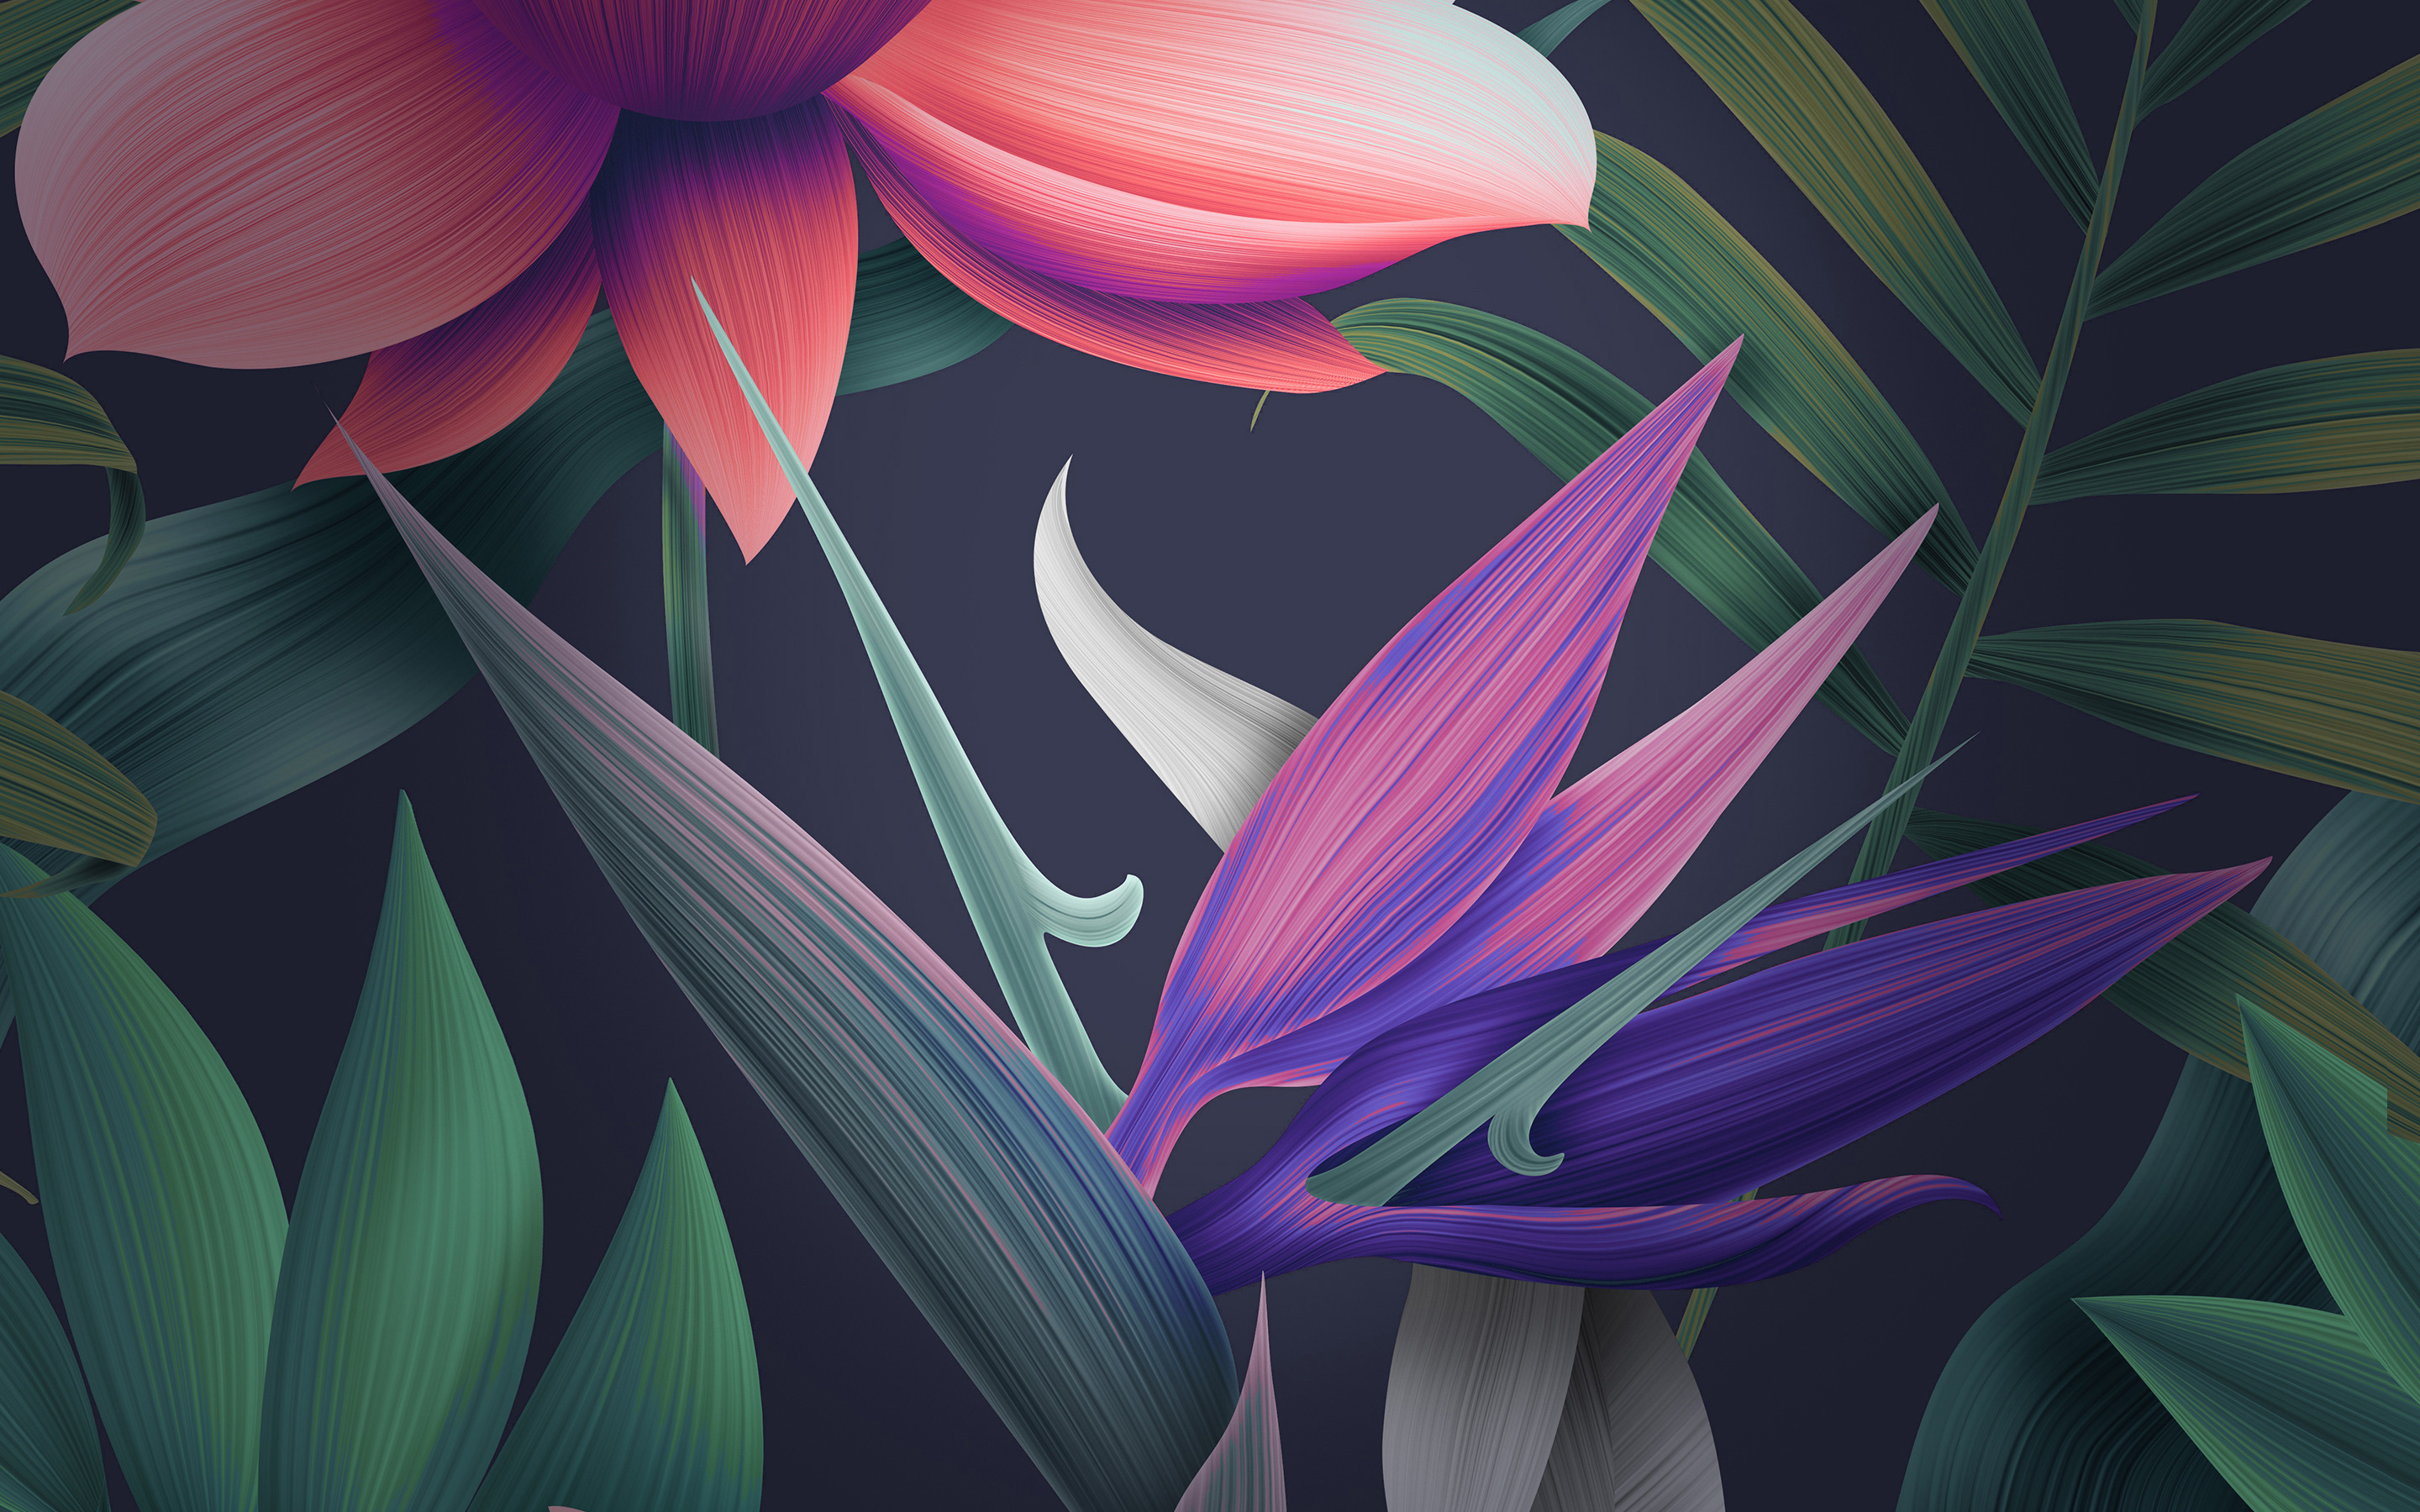 Floral Huawei Mate 10 Stock Wallpapers